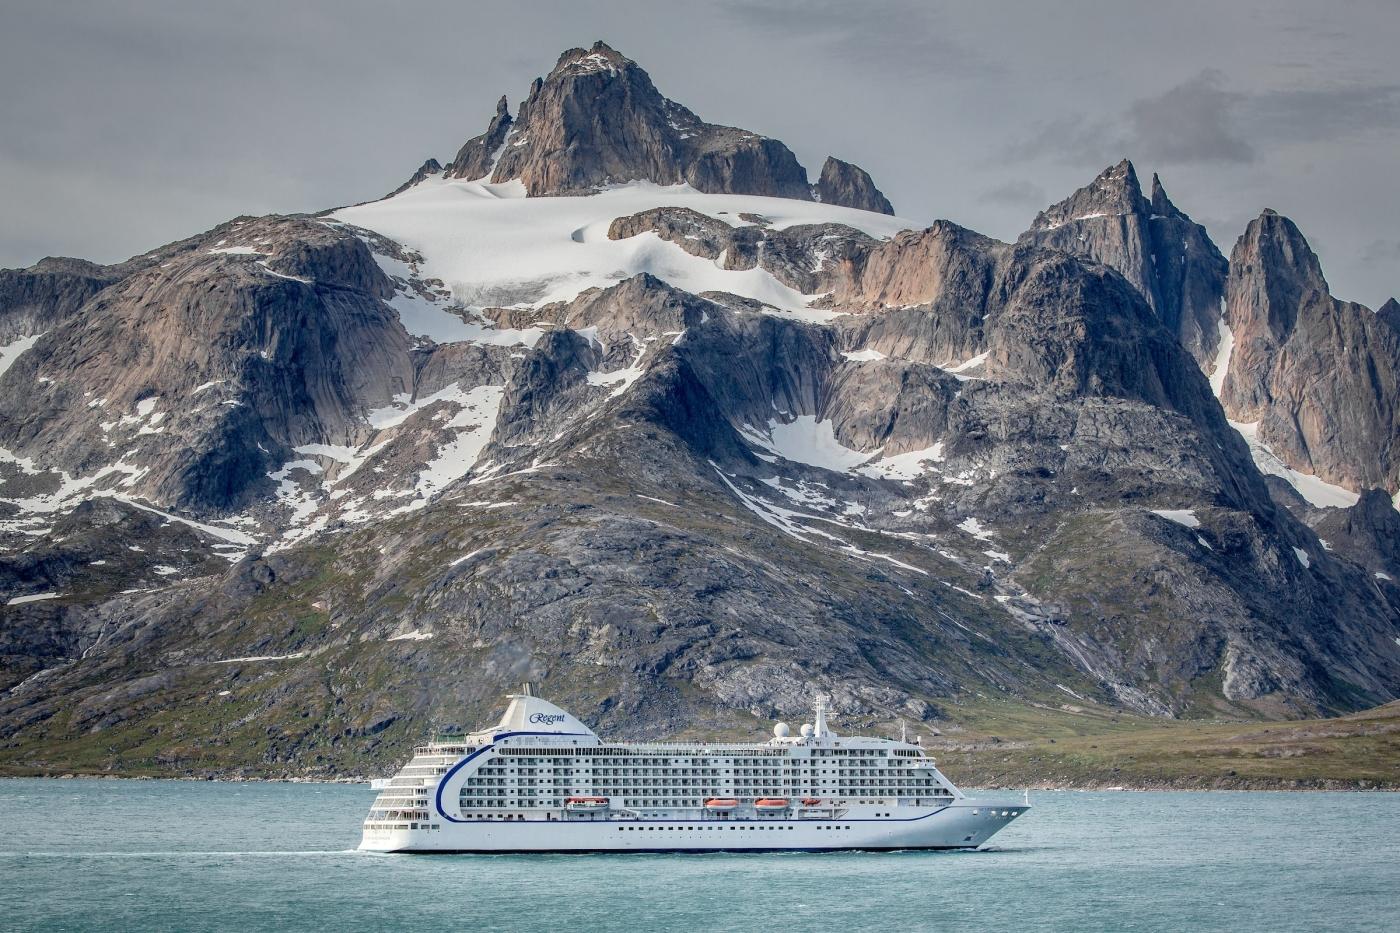 cruises from boston to greenland